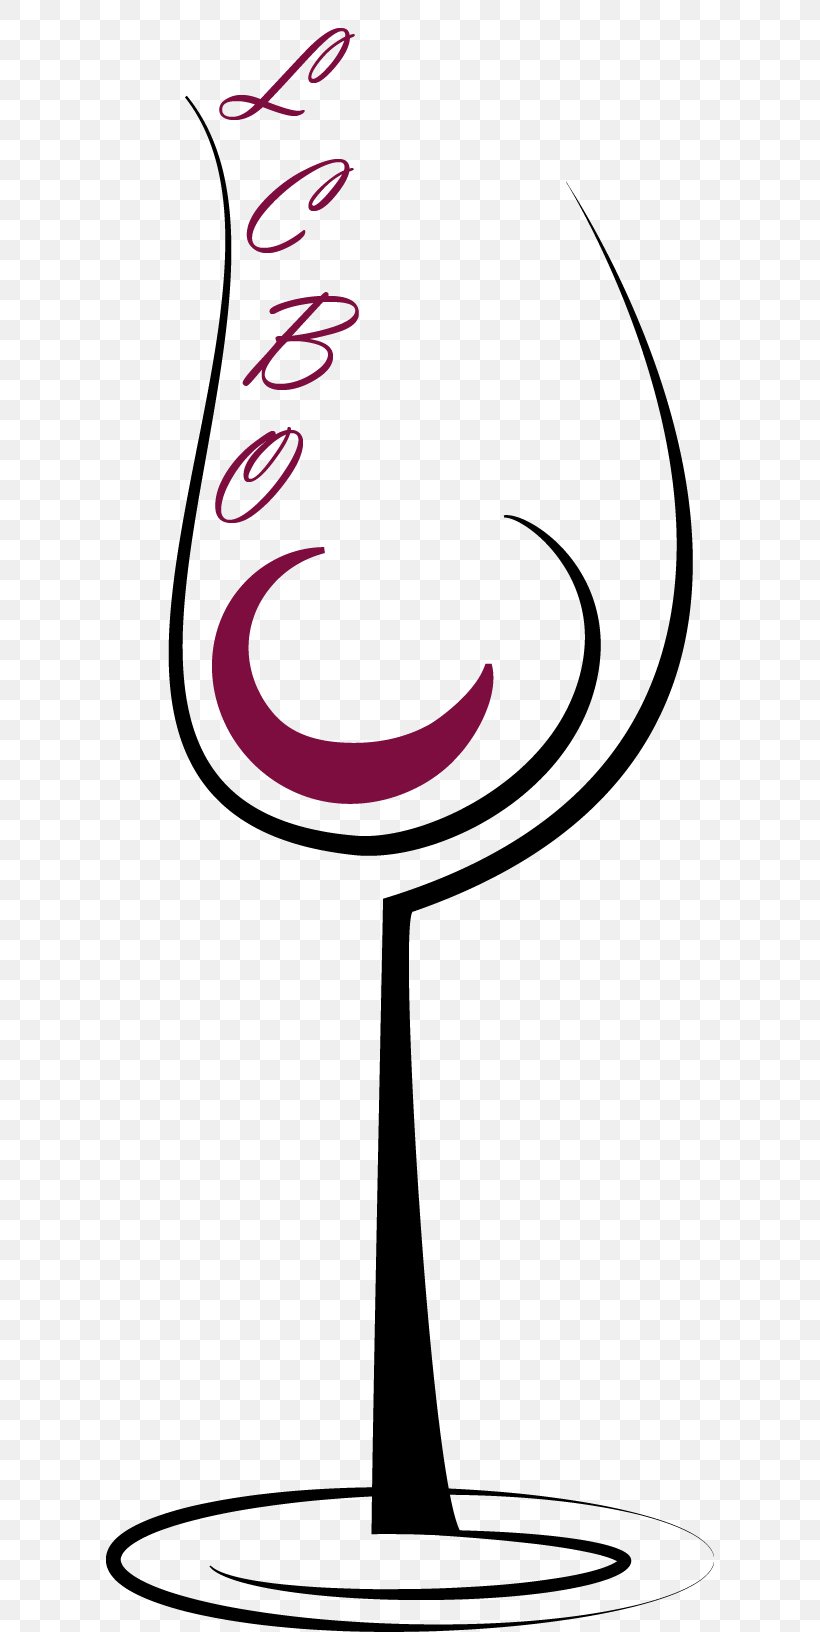 Wine Glass Badelounge Bubbles Wall Sticker Graz Design Colour Clip Art Champagne Glass Line Art, PNG, 608x1632px, Wine Glass, Area M Airsoft Koblenz, Cartoon, Centimeter, Champagne Glass Download Free